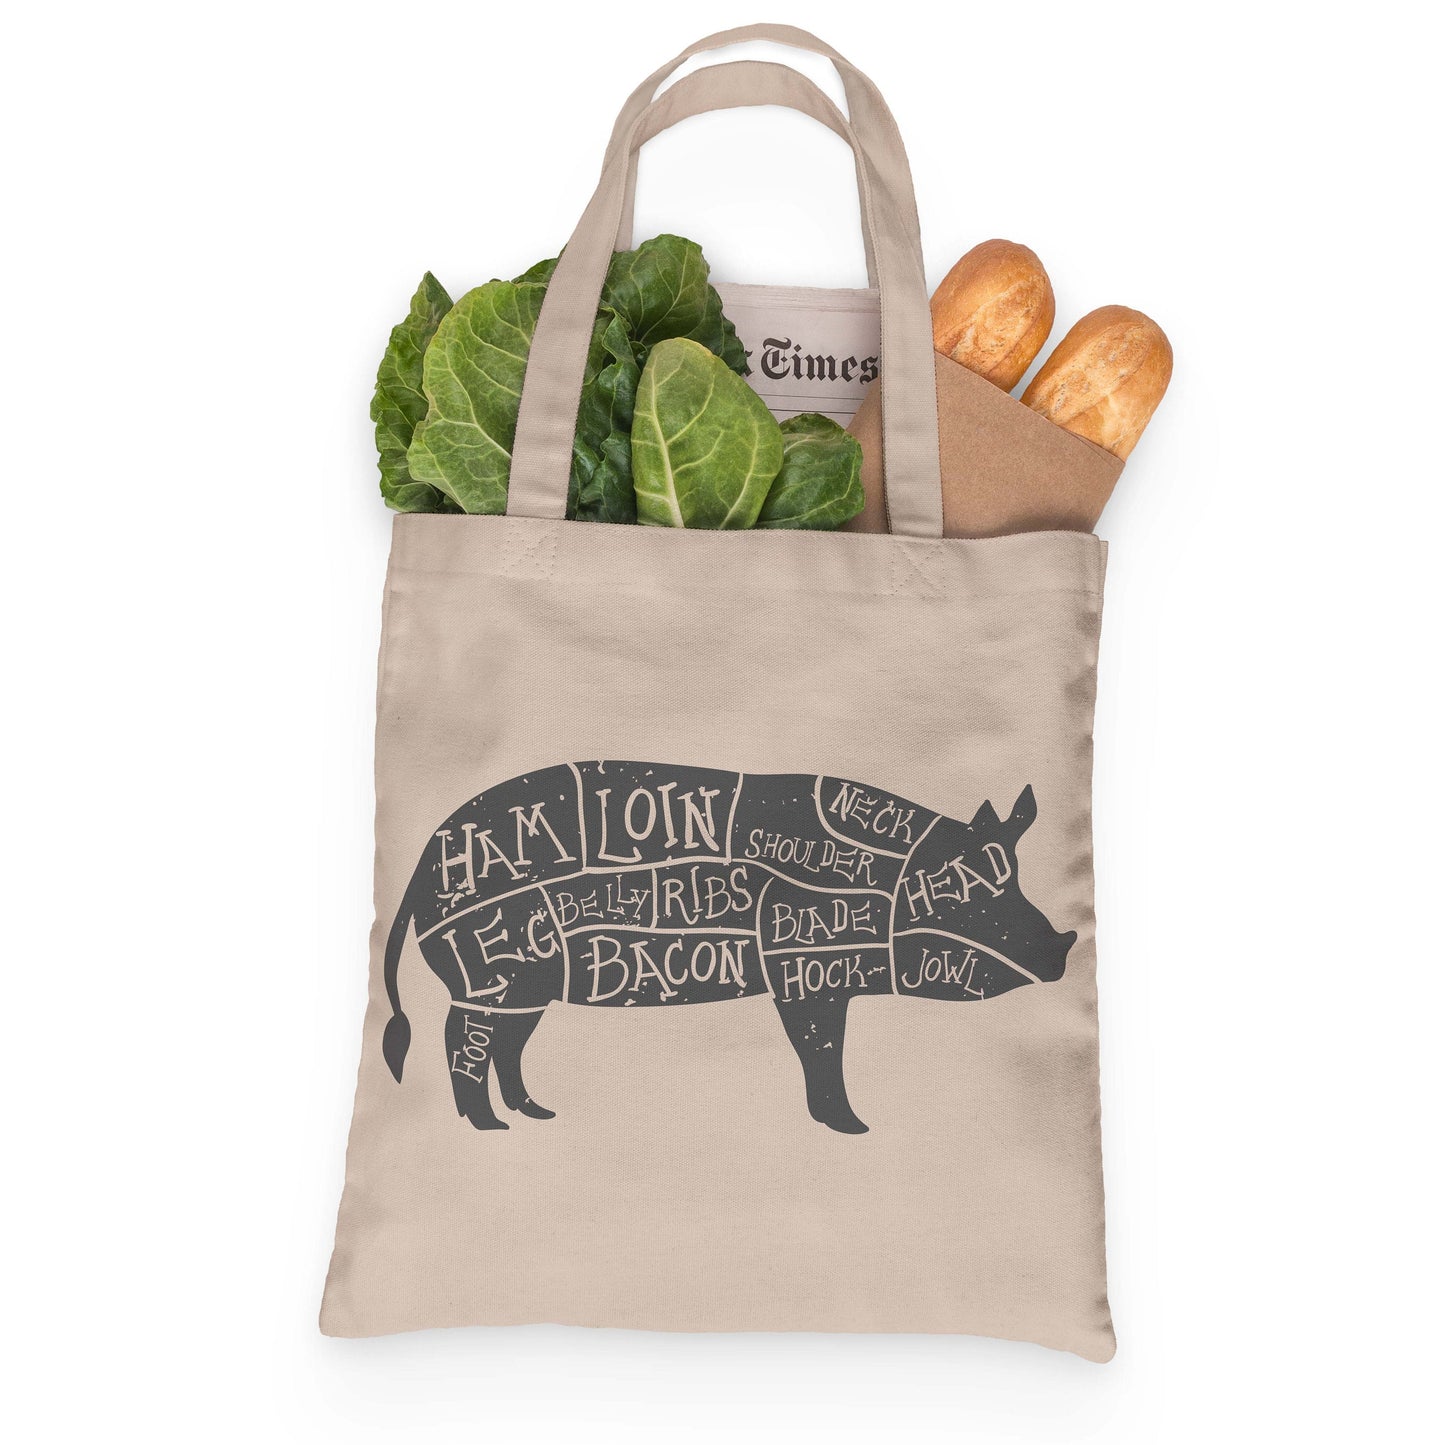 Vintage Butchers Pig Tote 100% Cotton Fun Grocery Tote, Book Tote. Premium Cotton Canvas 15.5" by 19.5 " with 5" Gusset, Cuts of Meat